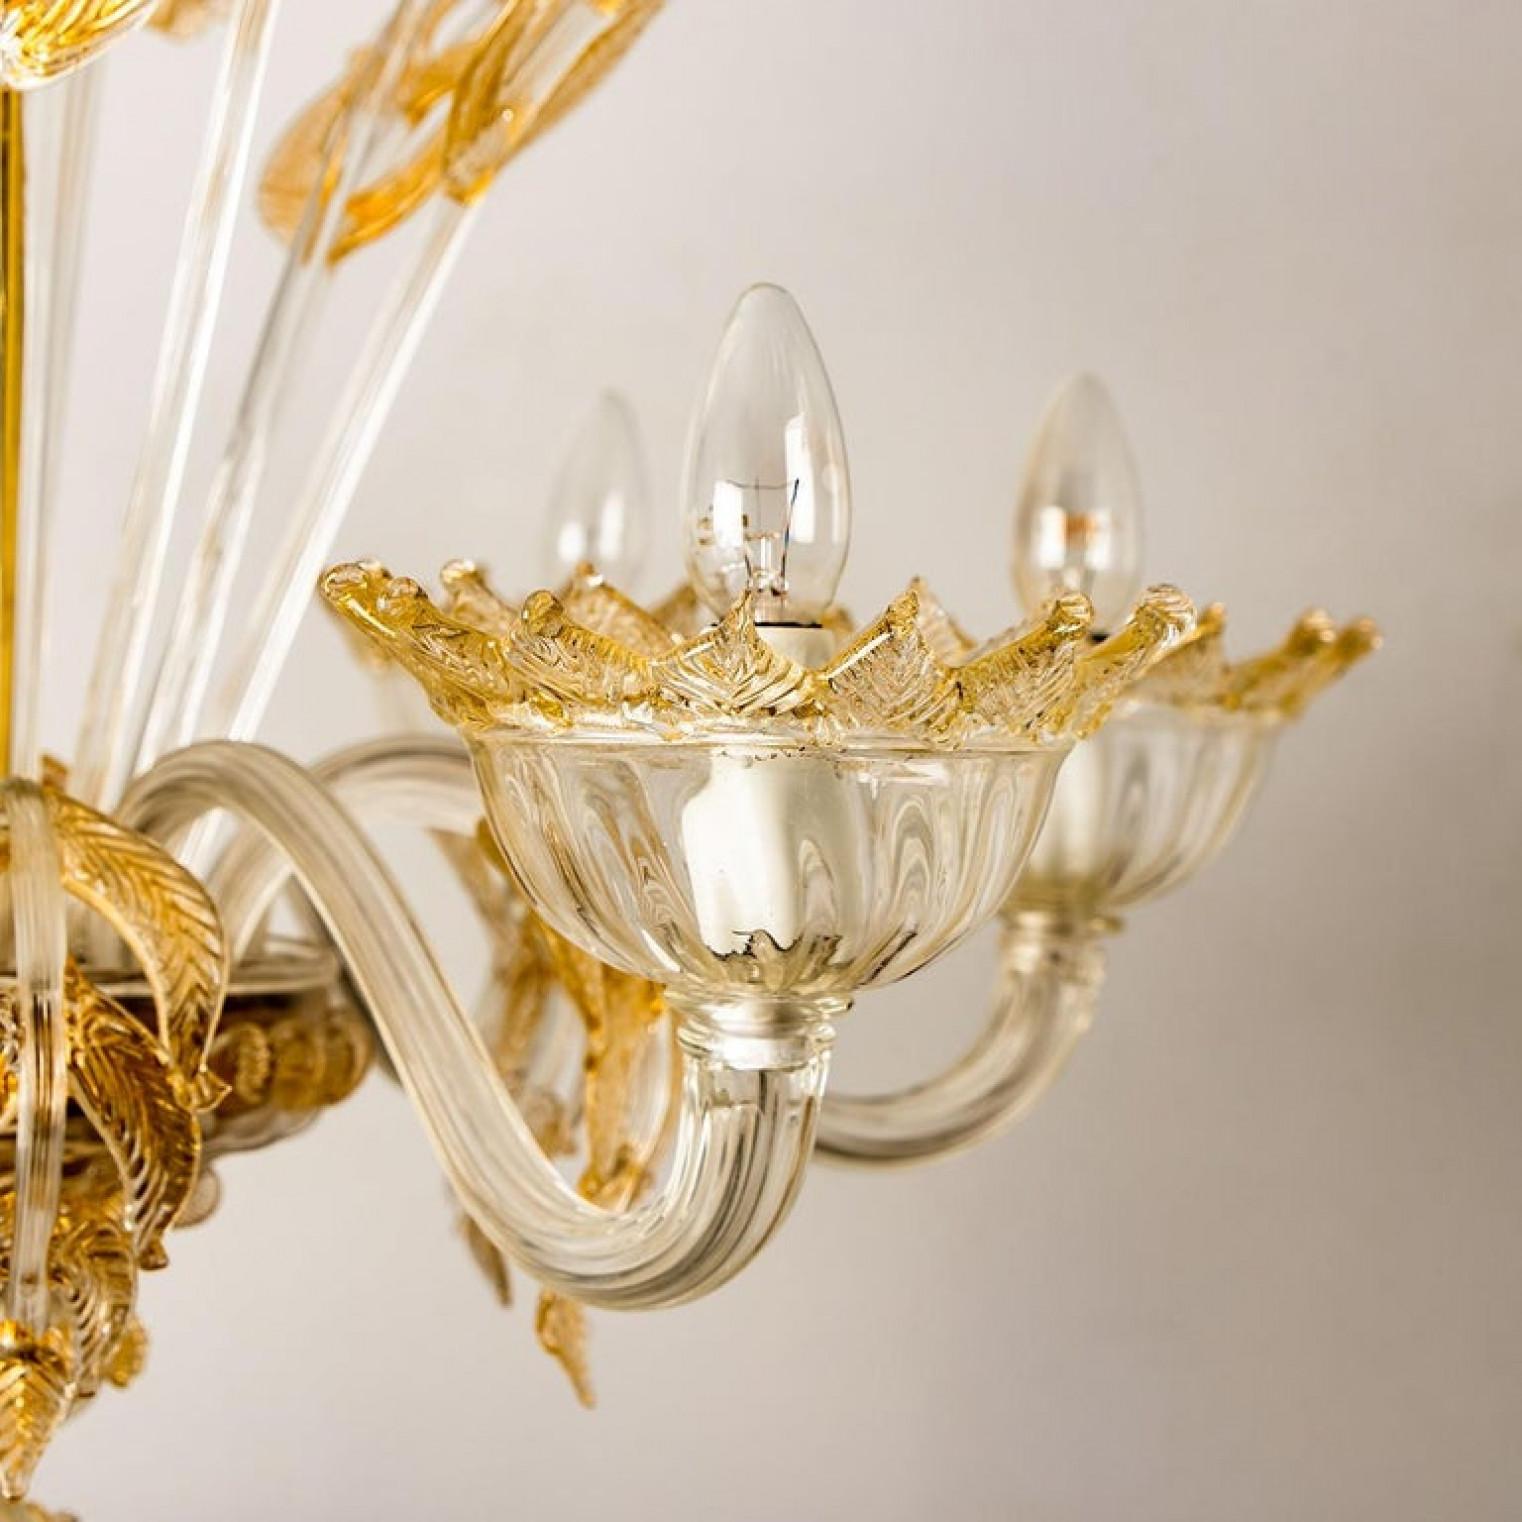 Mid-20th Century Large Venetian Chandelier in Gilded Murano Glass, by Barovier, 1950s For Sale